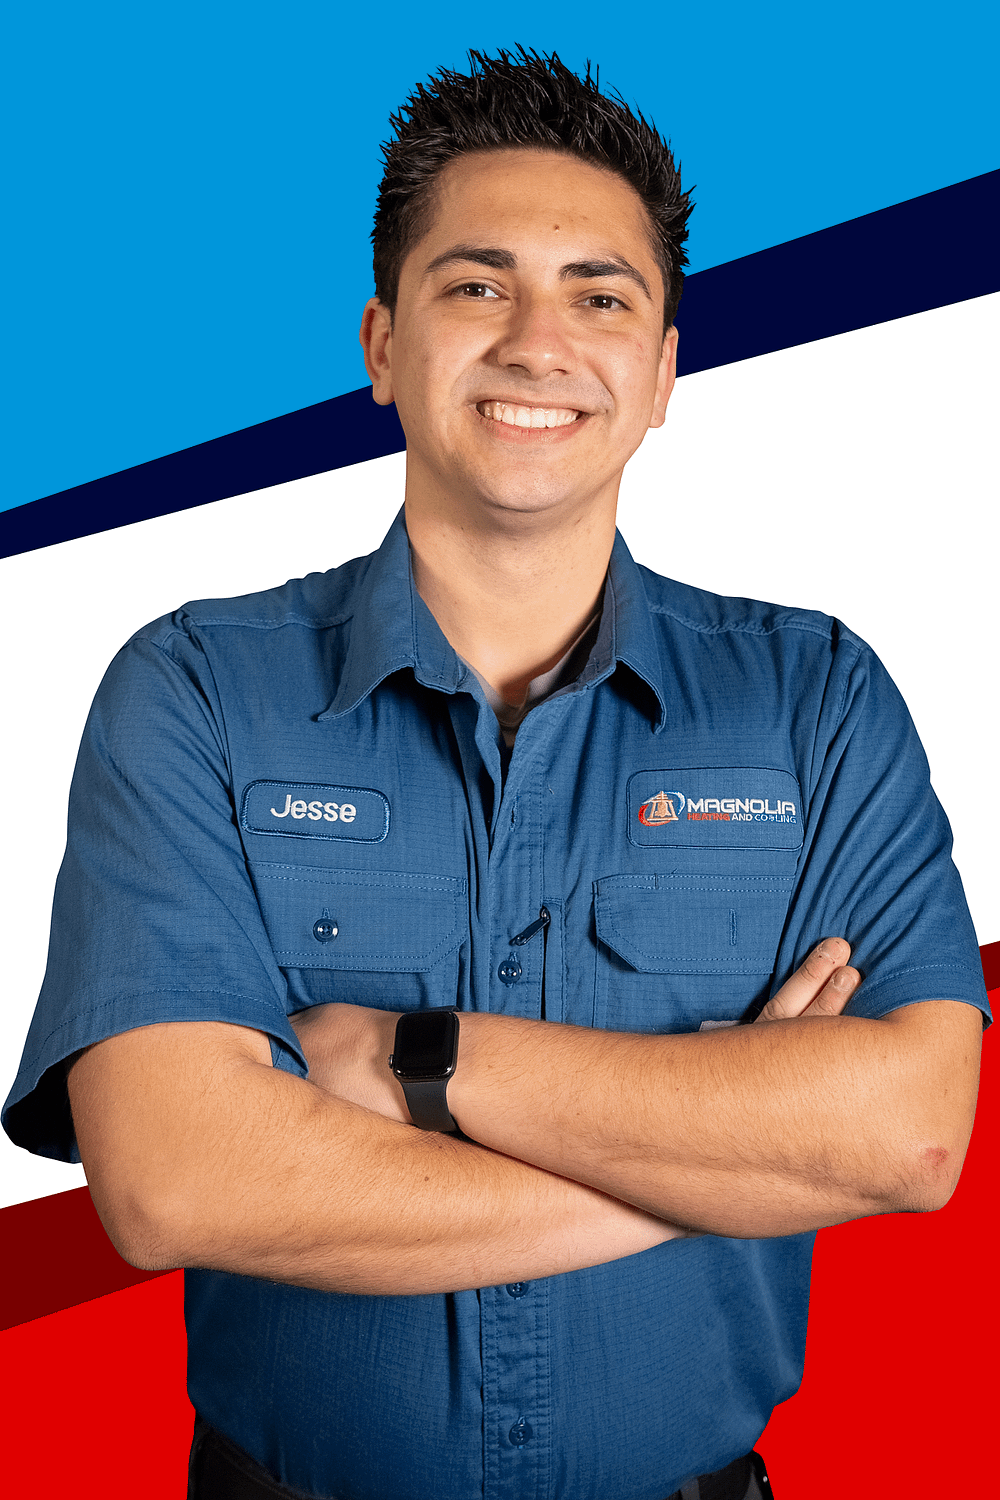 Magnolia Heating and Air Conditioning Technician